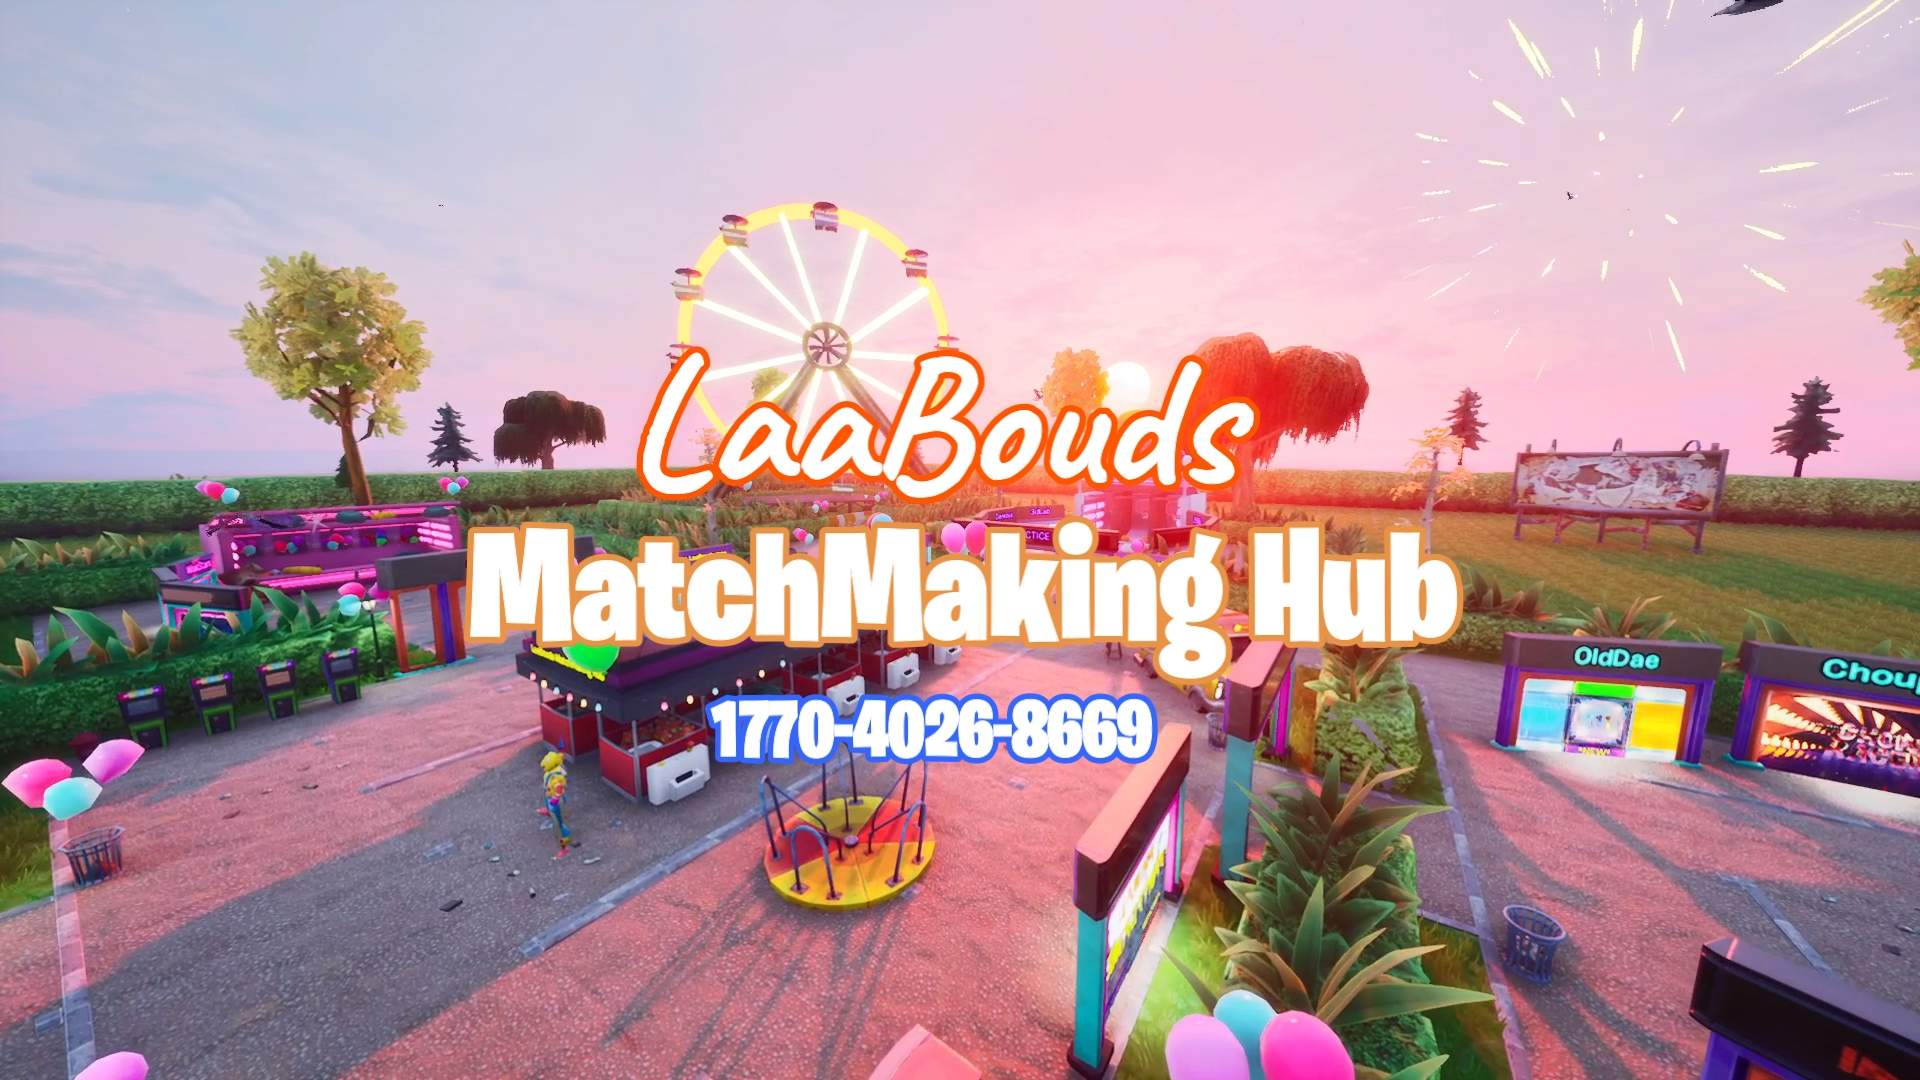 LAABOUDS MATCHMAKING HUB